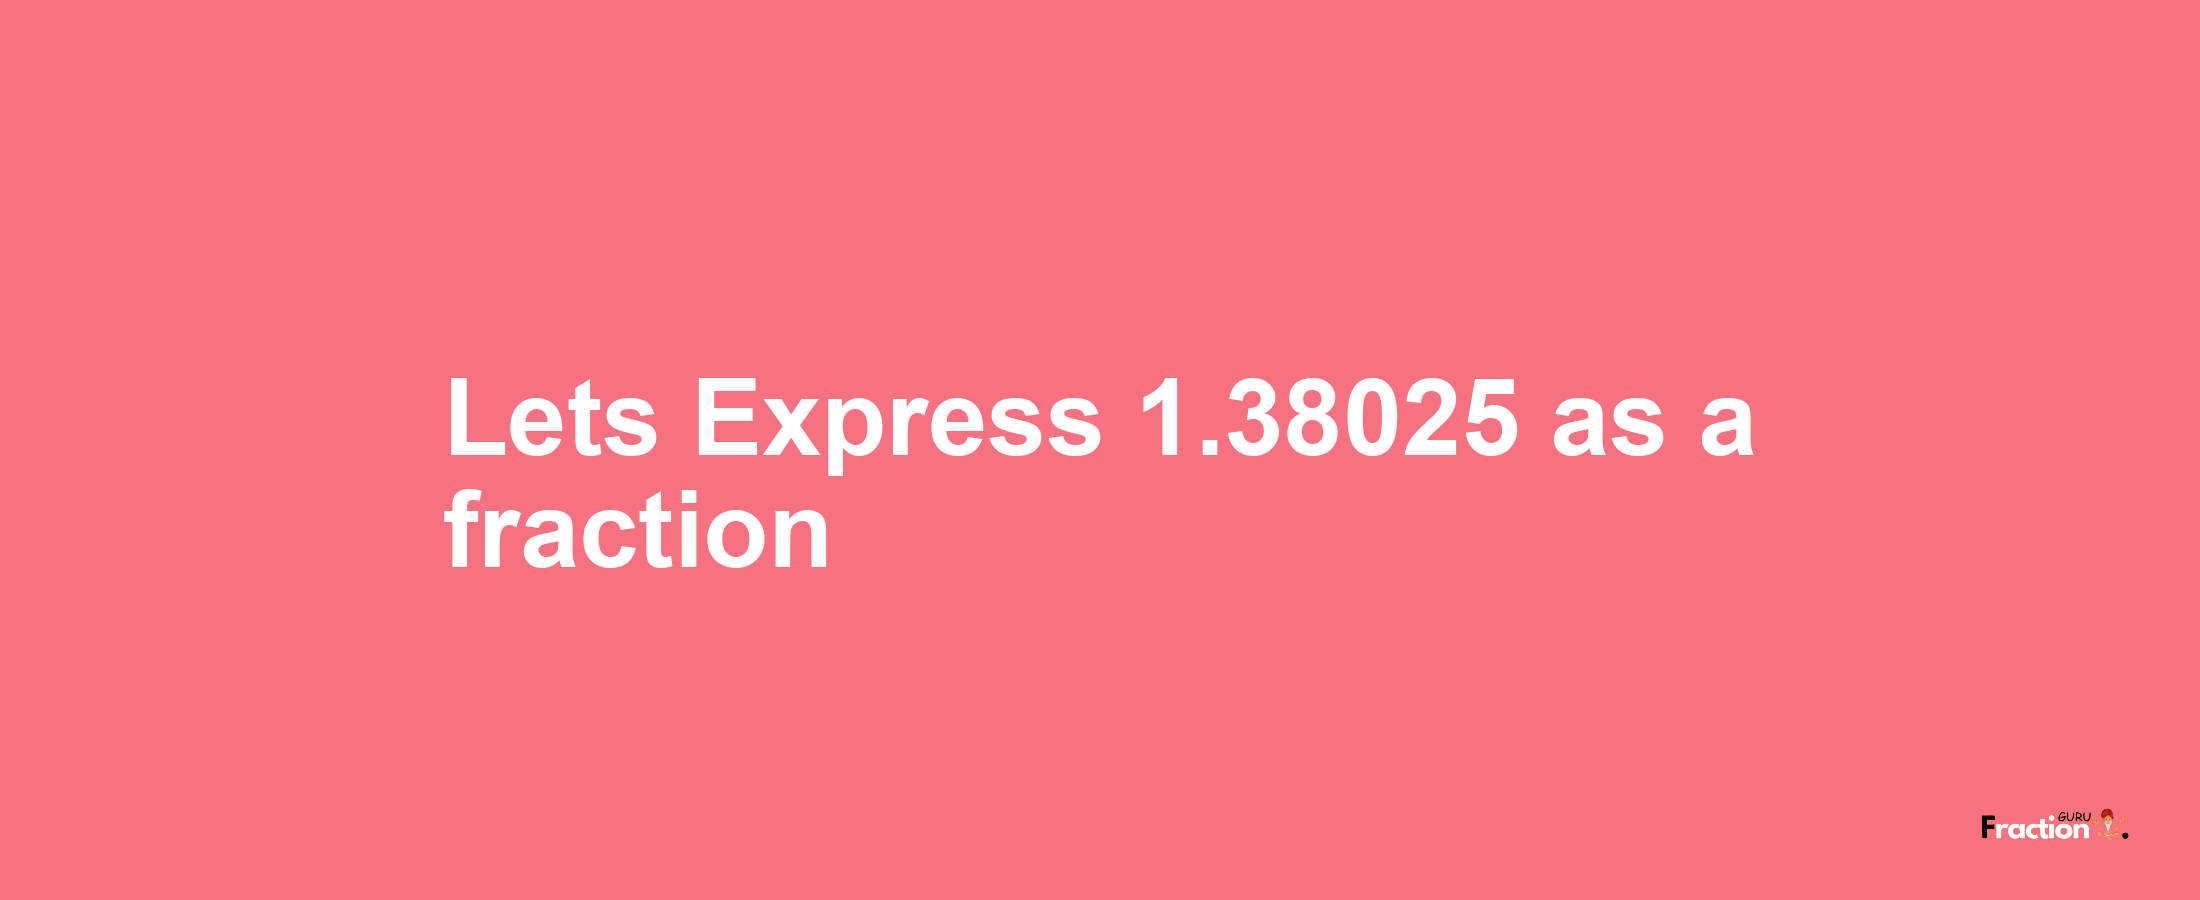 Lets Express 1.38025 as afraction